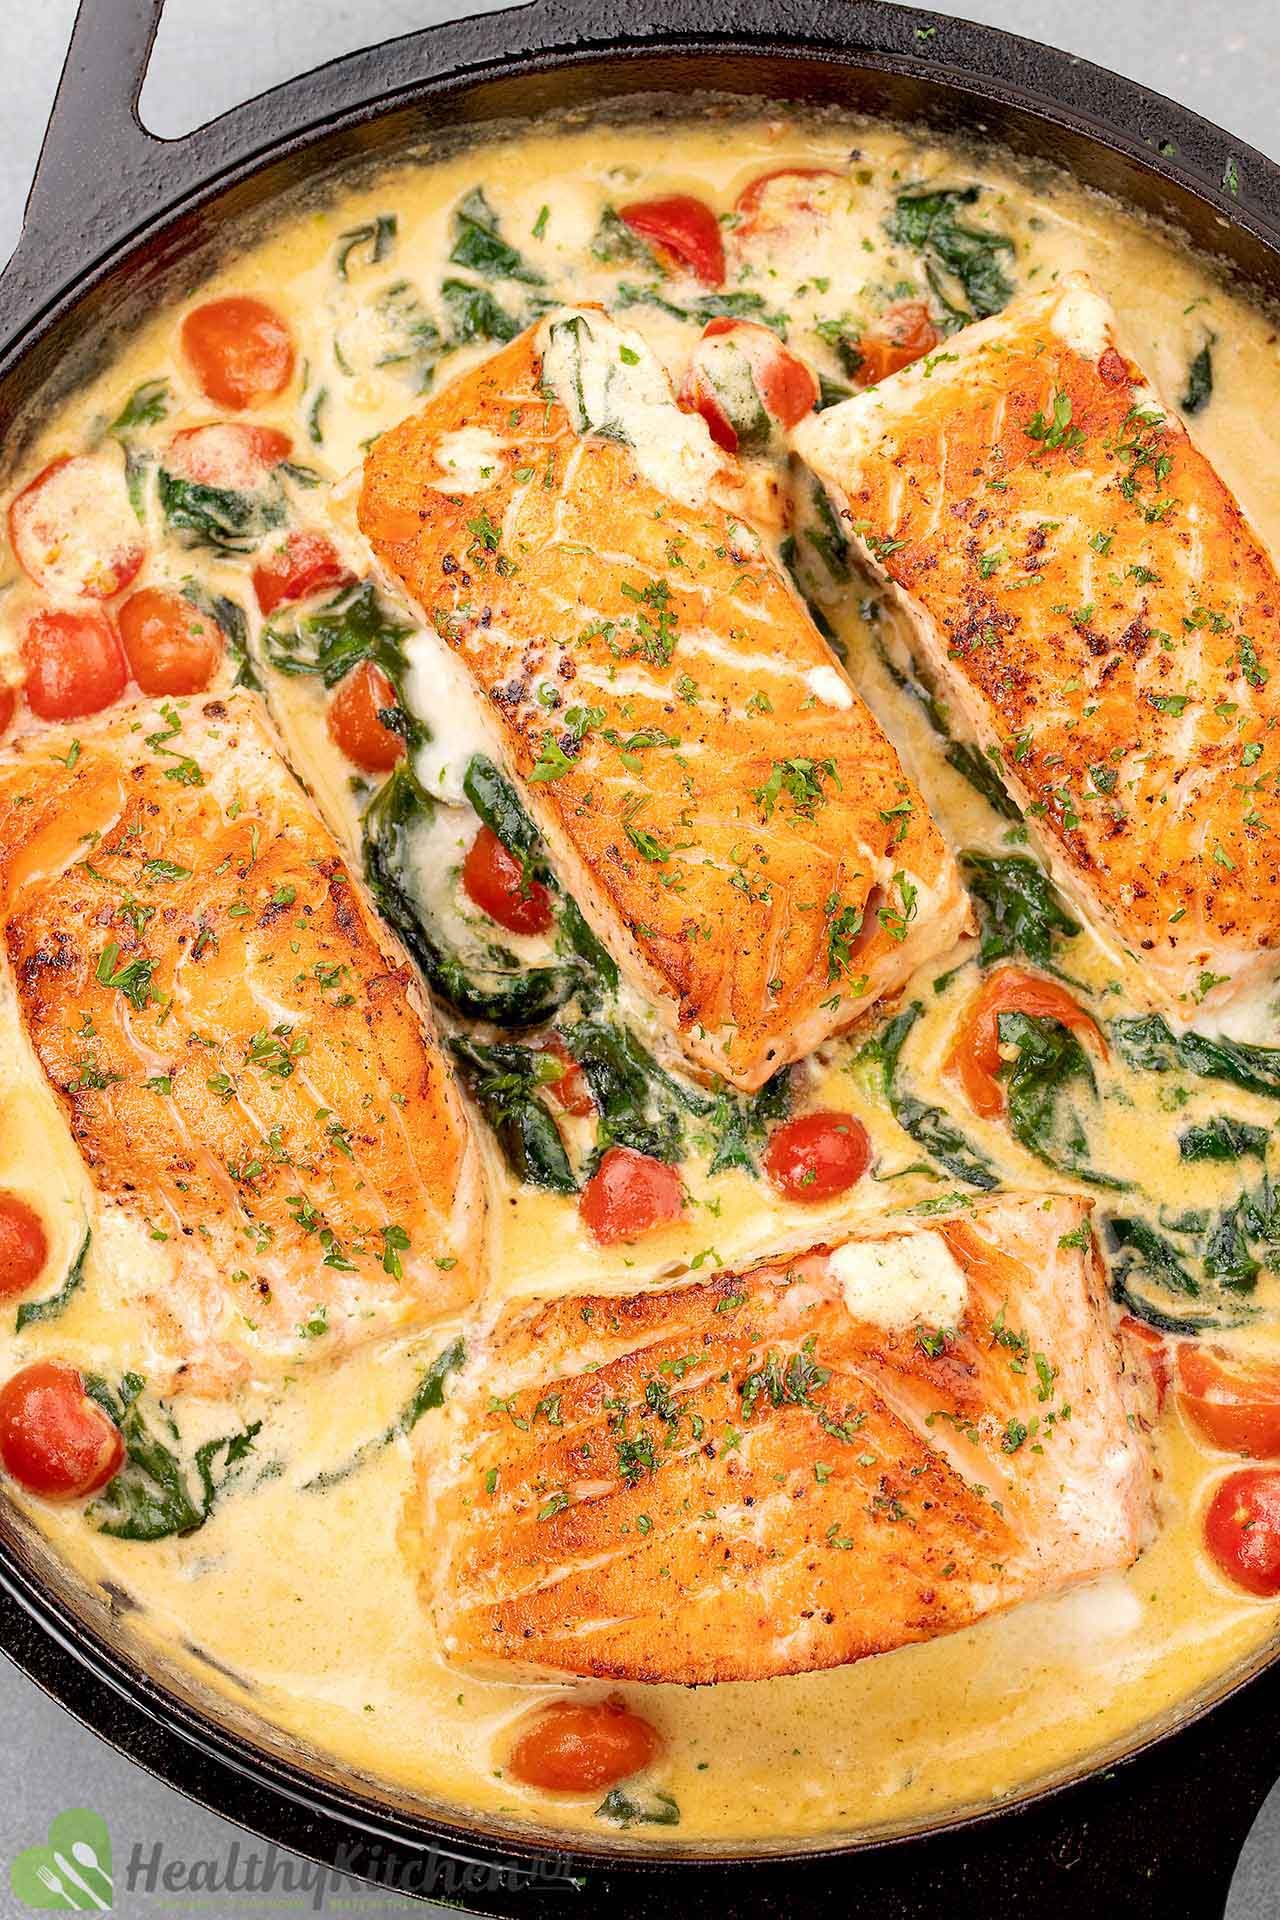 Tuscan Butter Salmon Recipe - An Italian Delish Done in Simple Steps